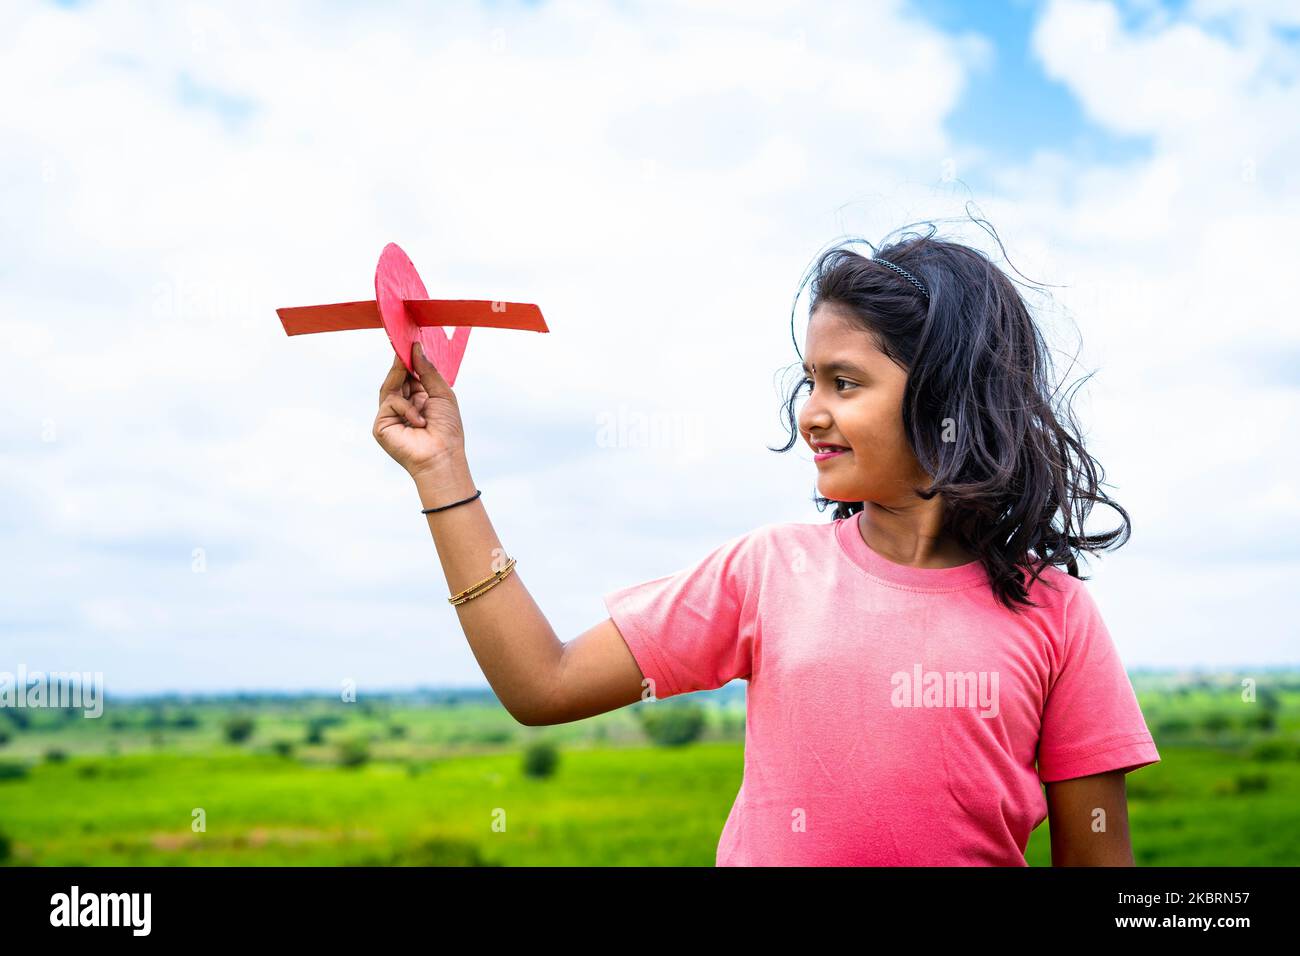 Happy smiling teenager girl playing with cardboard aeroplane at mountain - concept of childhood pilot dream, freedom and aspirations Stock Photo